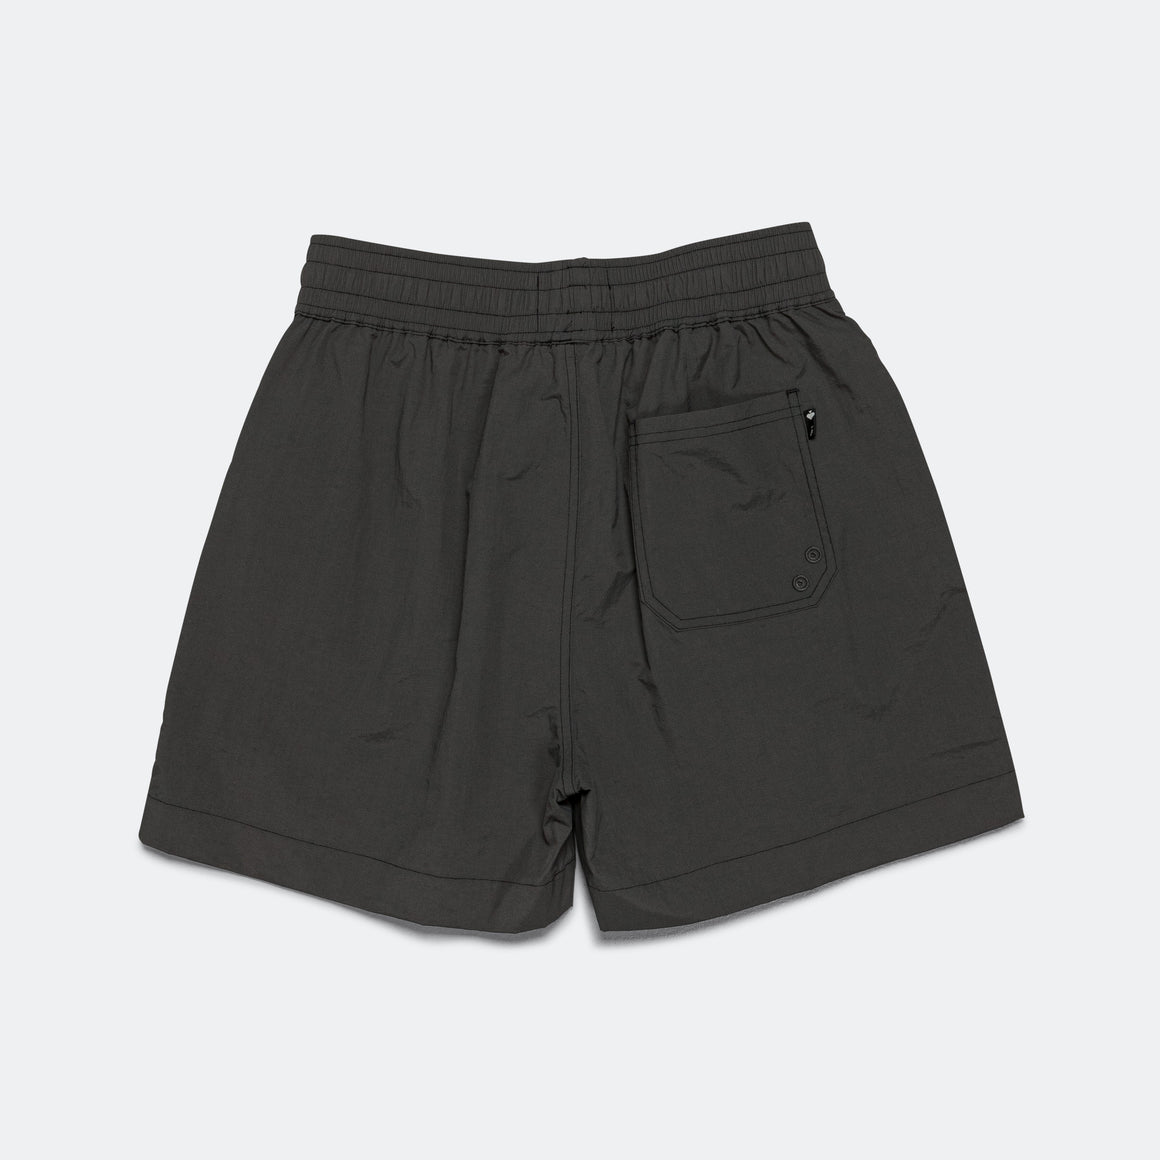 Beach Brains - Boxer Boardshort - Charcoal - UP THERE